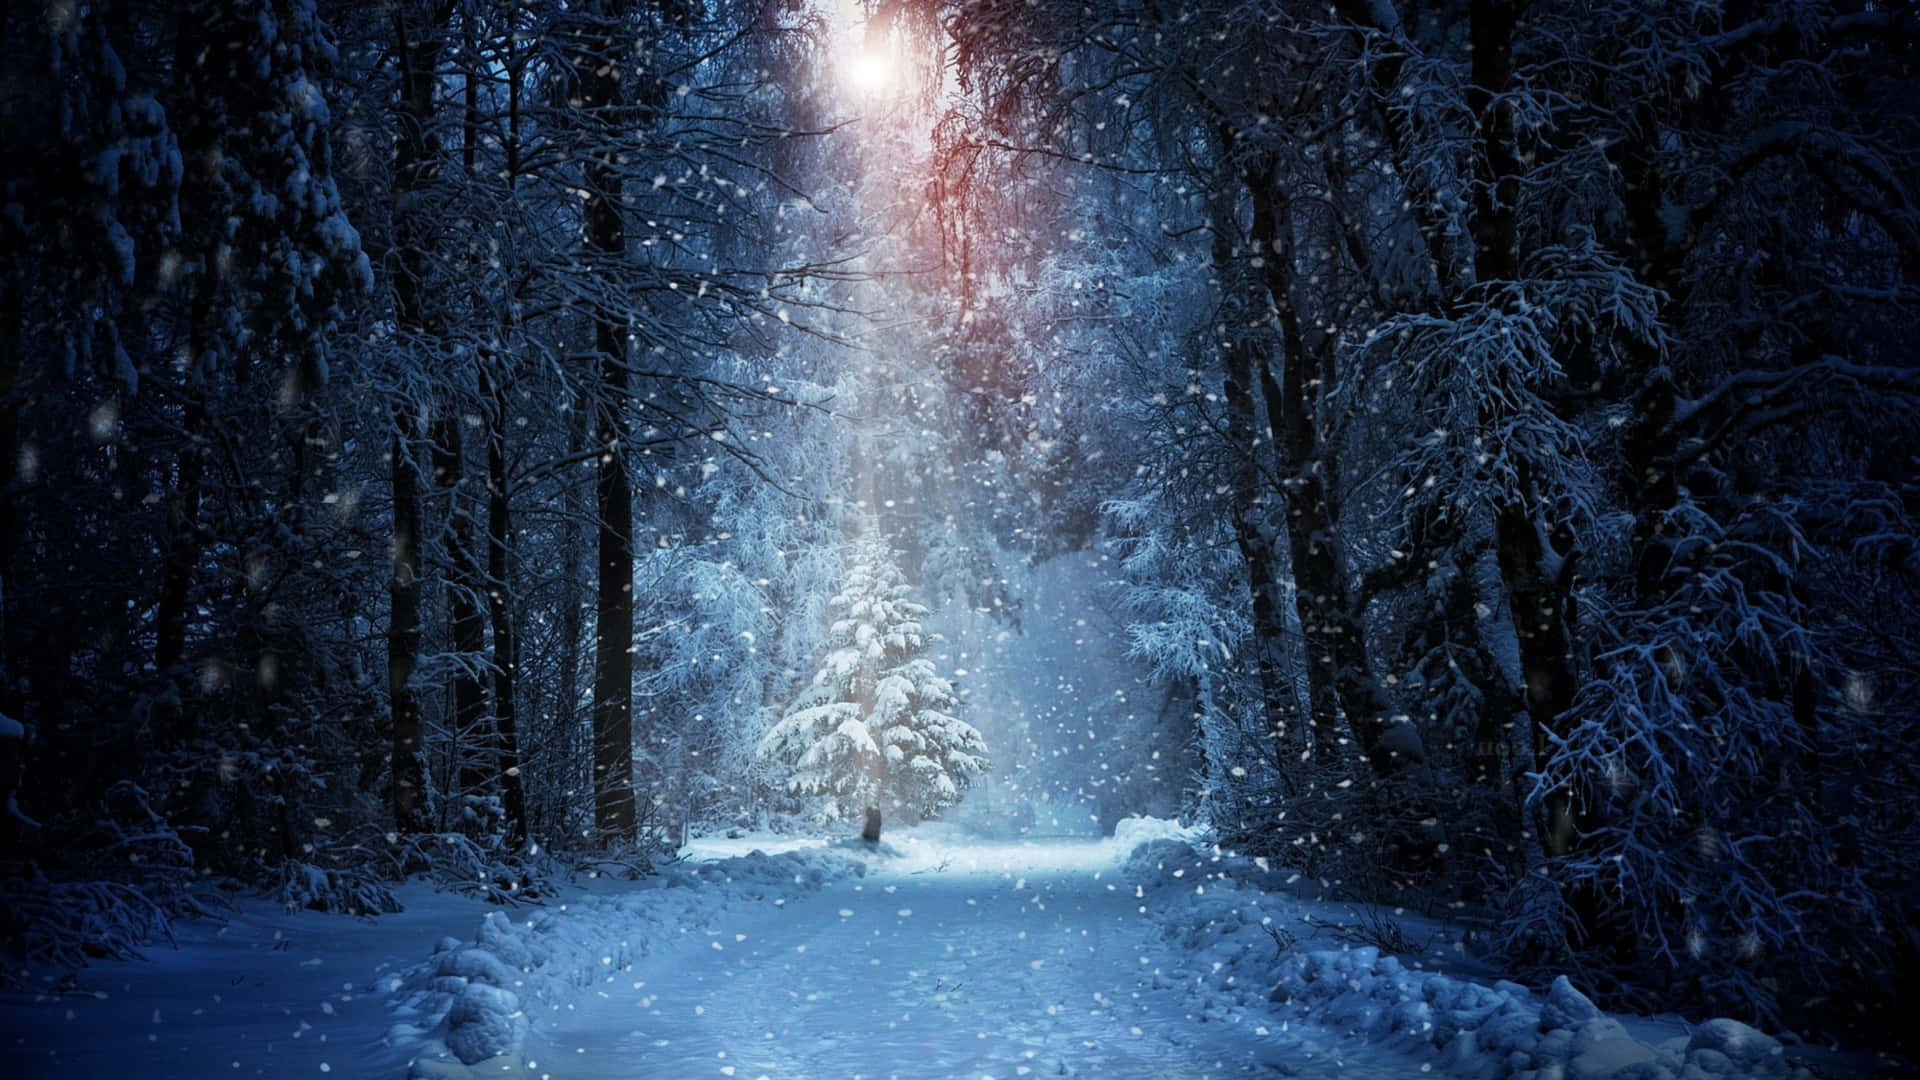 A Snowy Forest With A Light Shining Through It